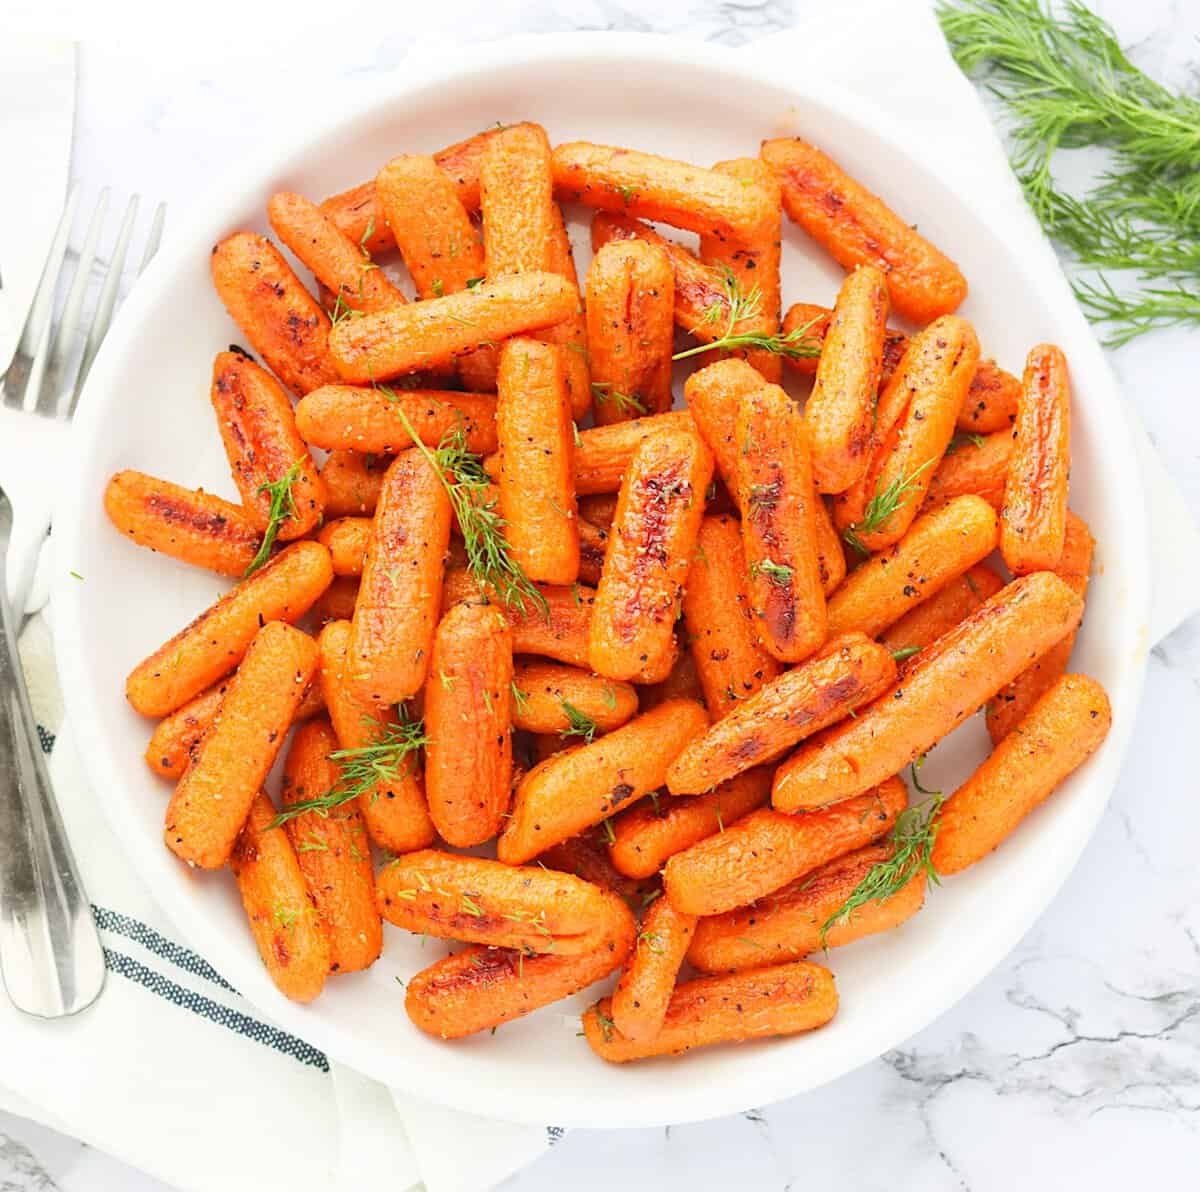 Naturally sweet Roasted Baby Carrots served up on a white plate ready to enjoy